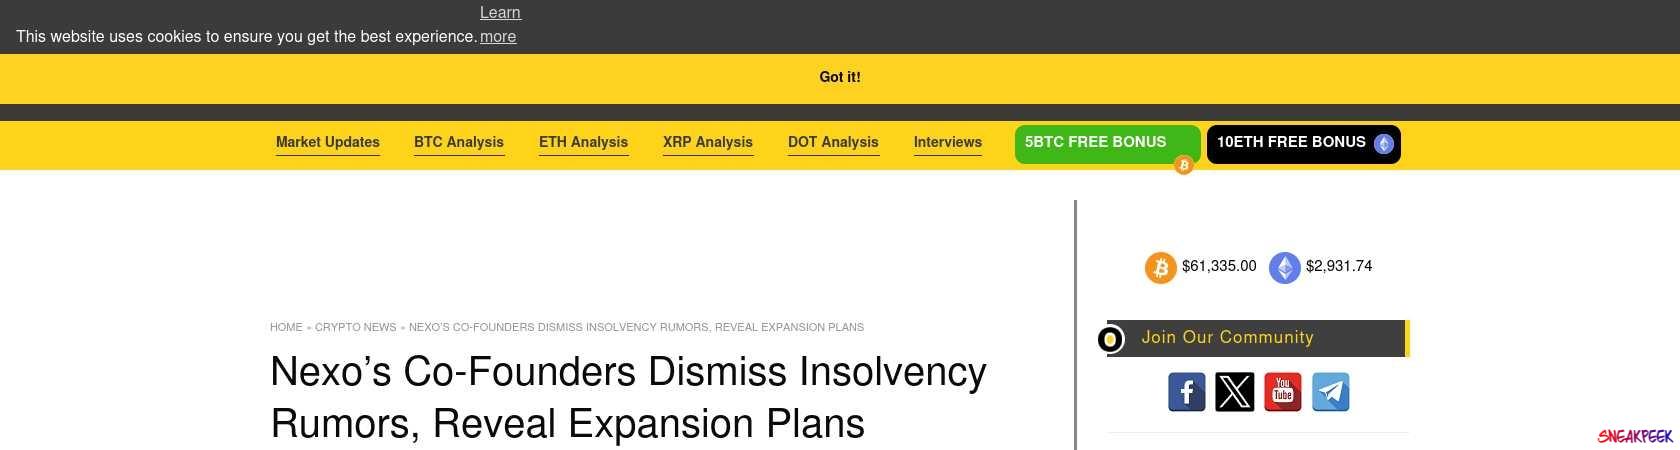 Read the full Article:  ⭲ Nexo’s Co-Founders Dismiss Insolvency Rumors, Reveal Expansion Plans